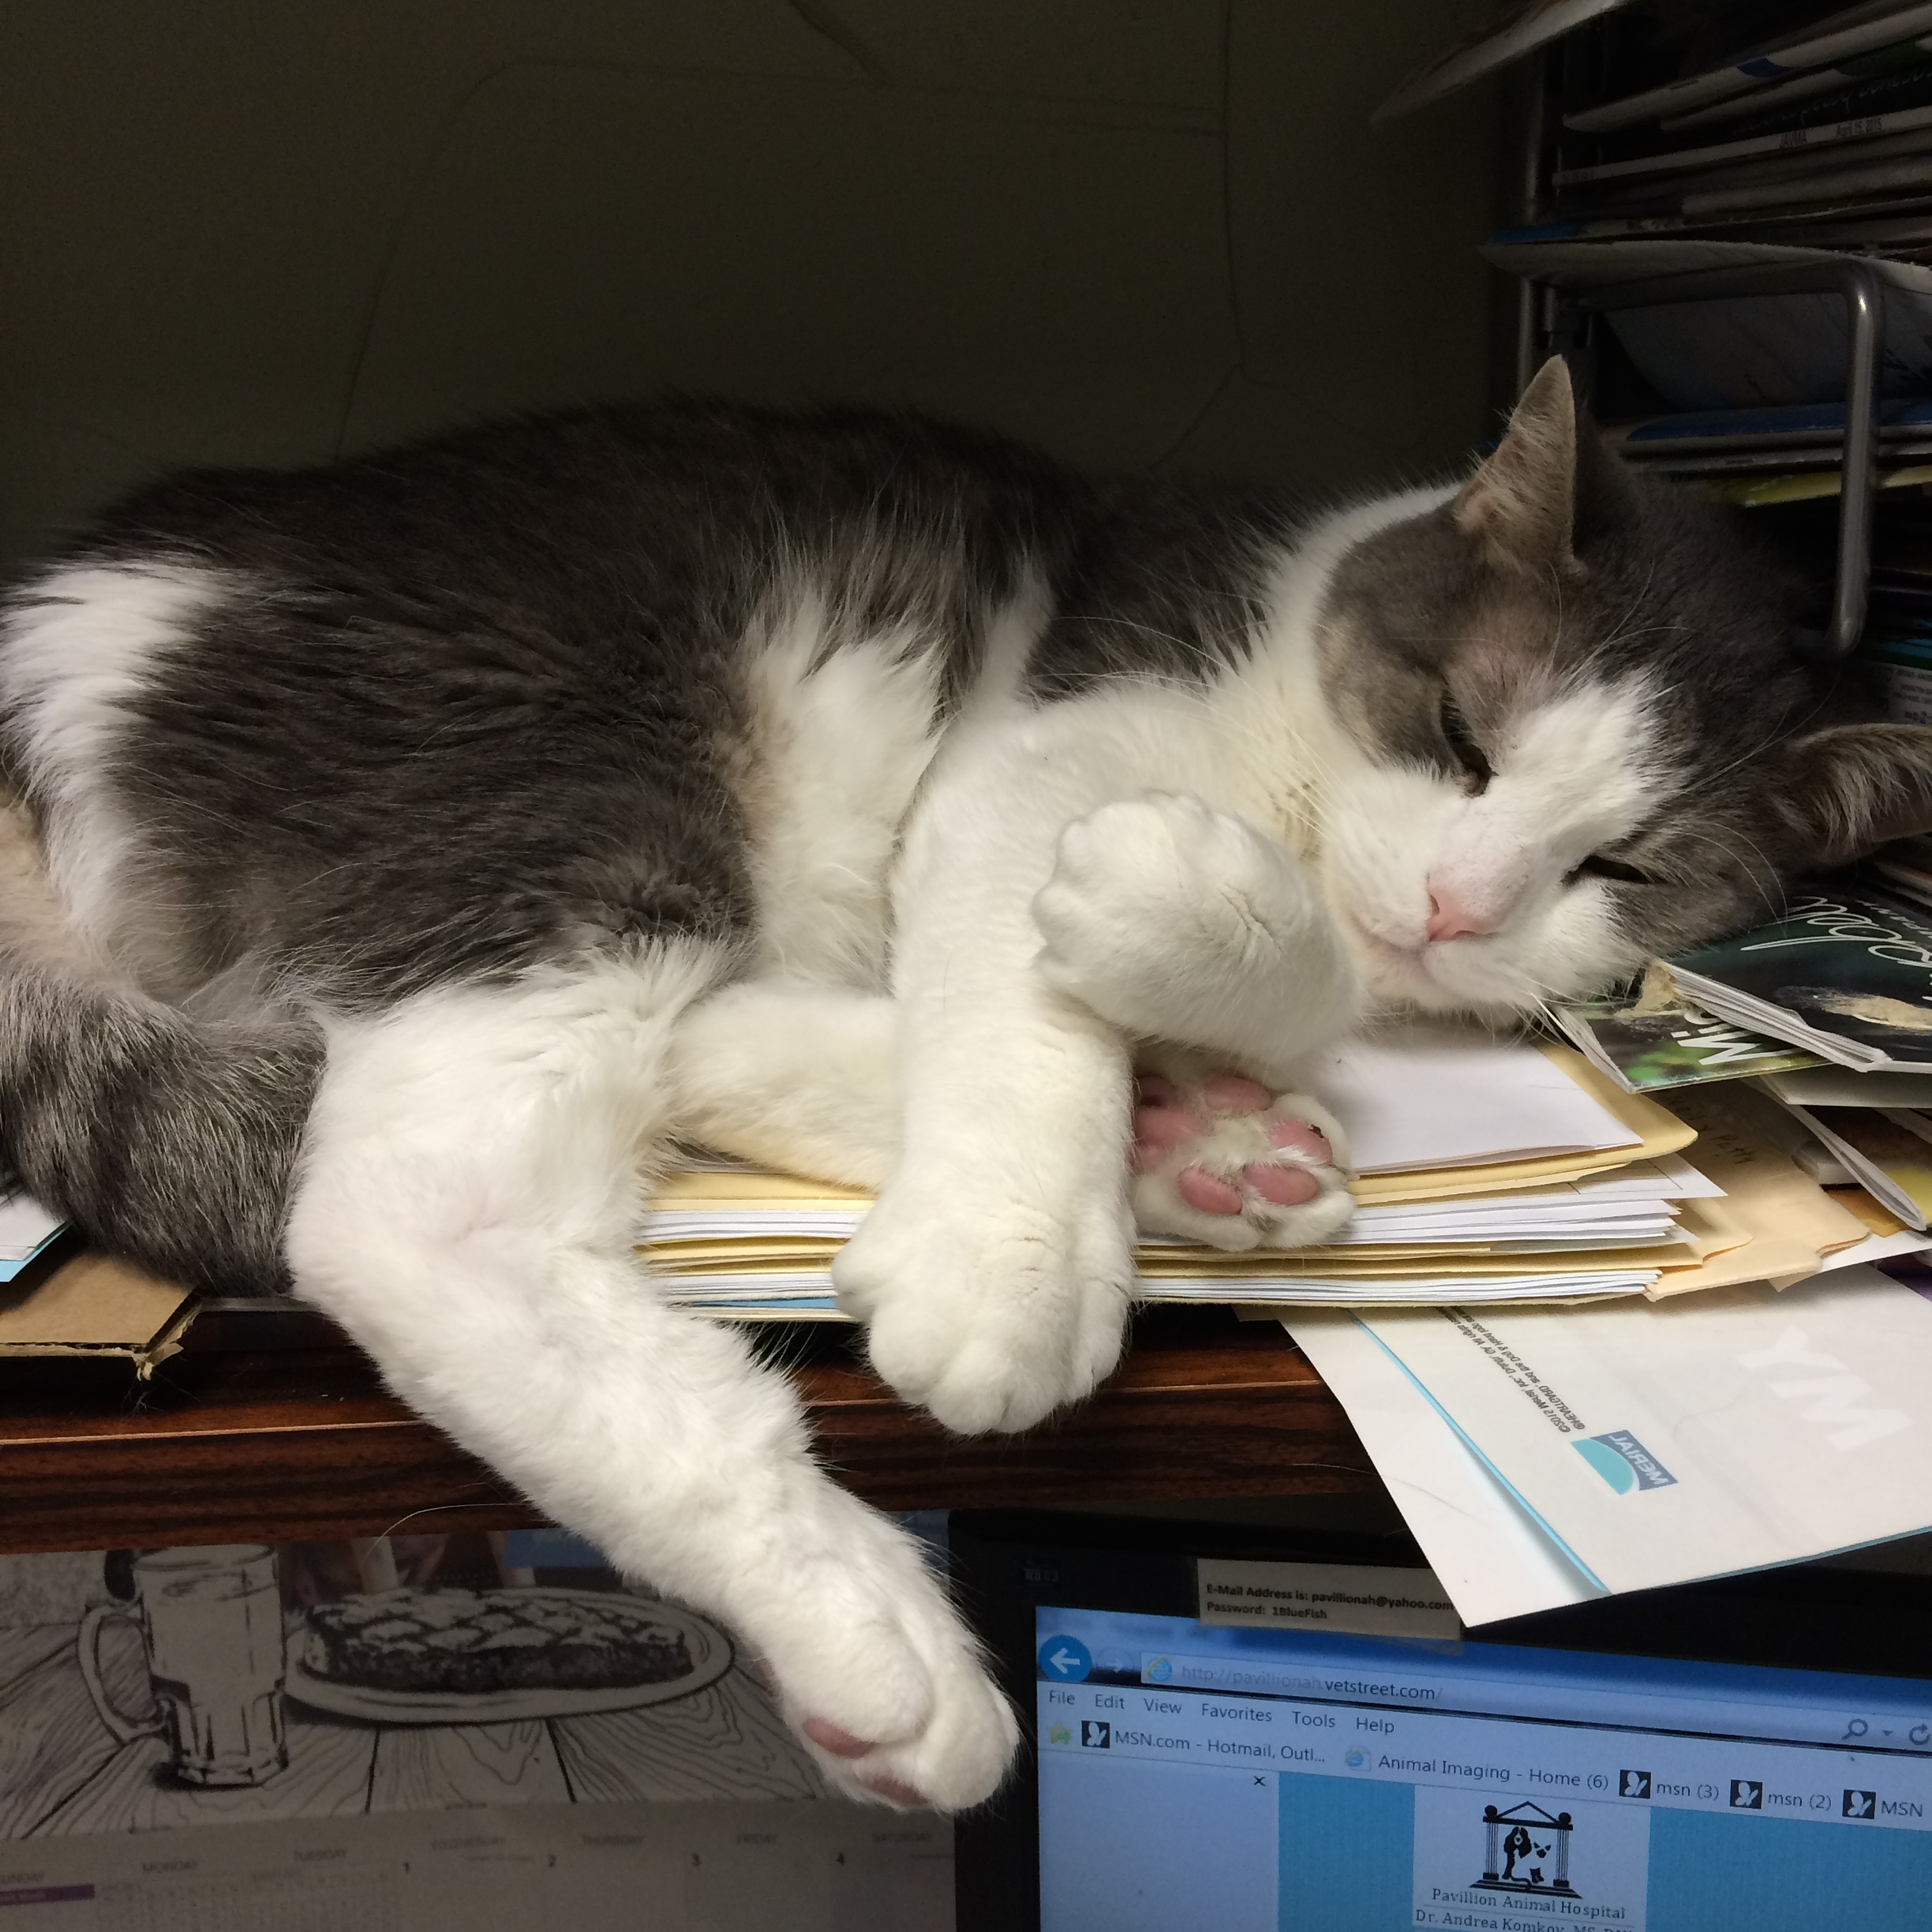 A Cat Sleeping on Documents